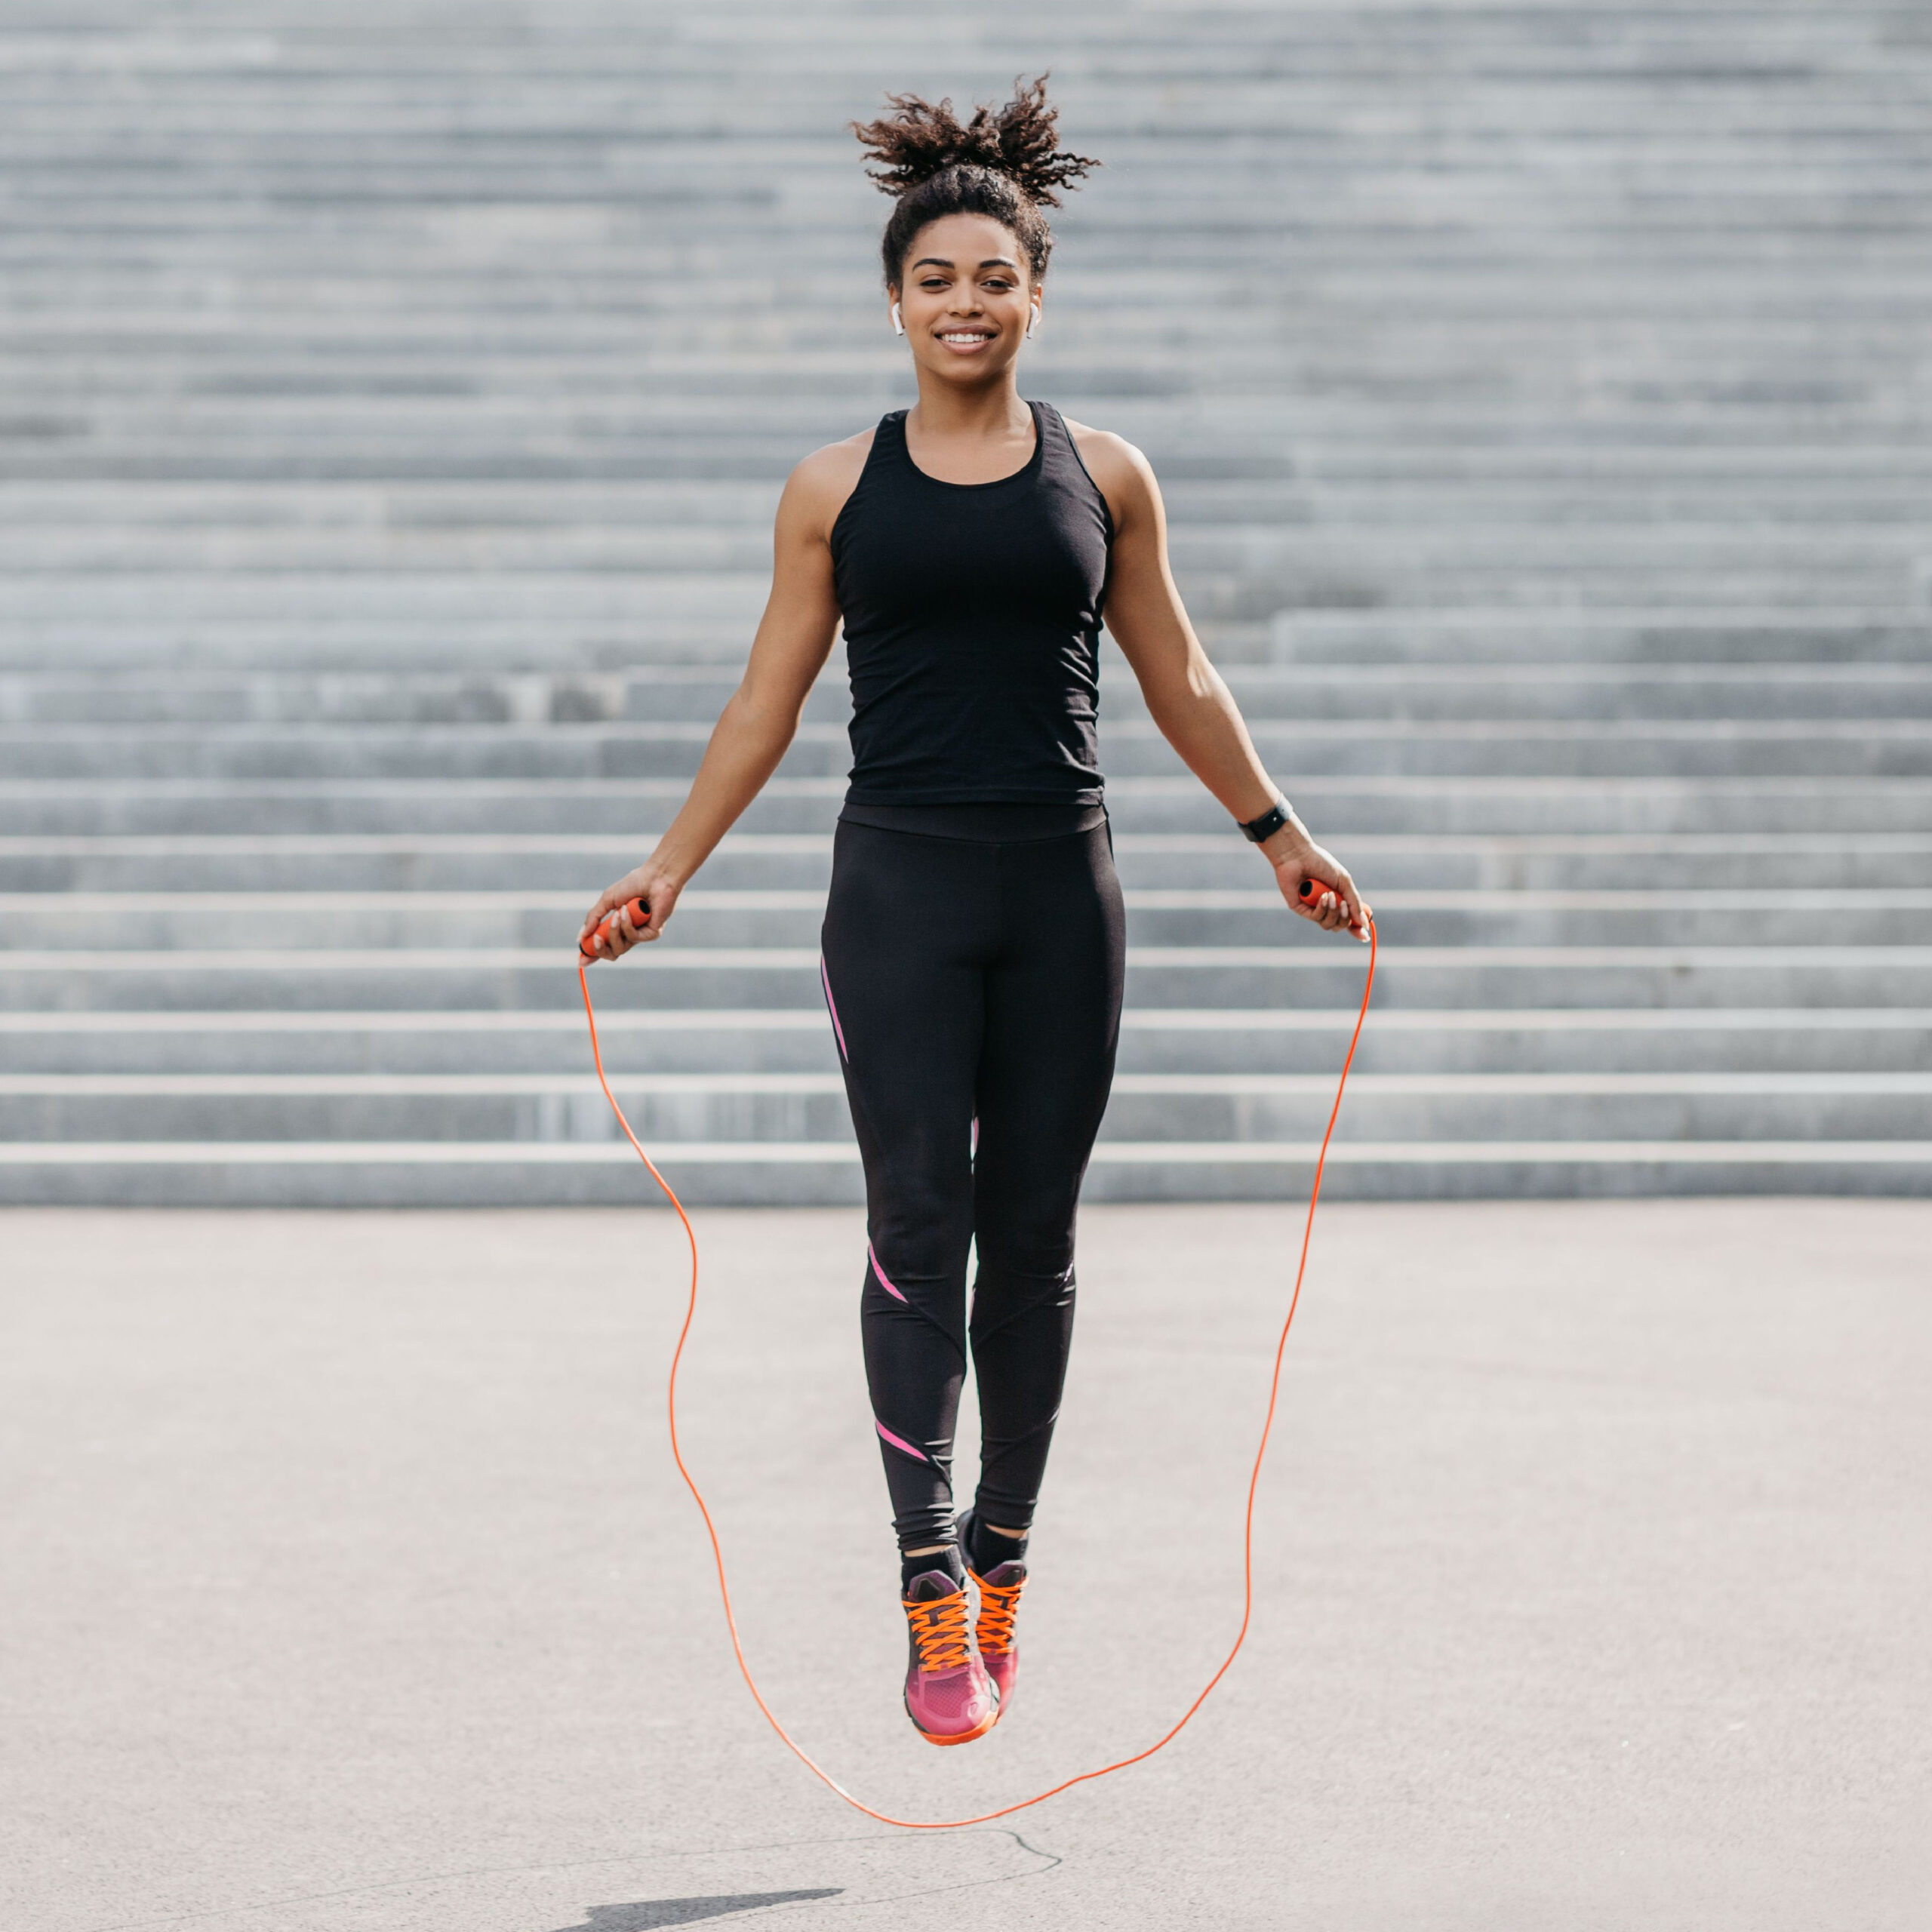 woman jump-roping outside